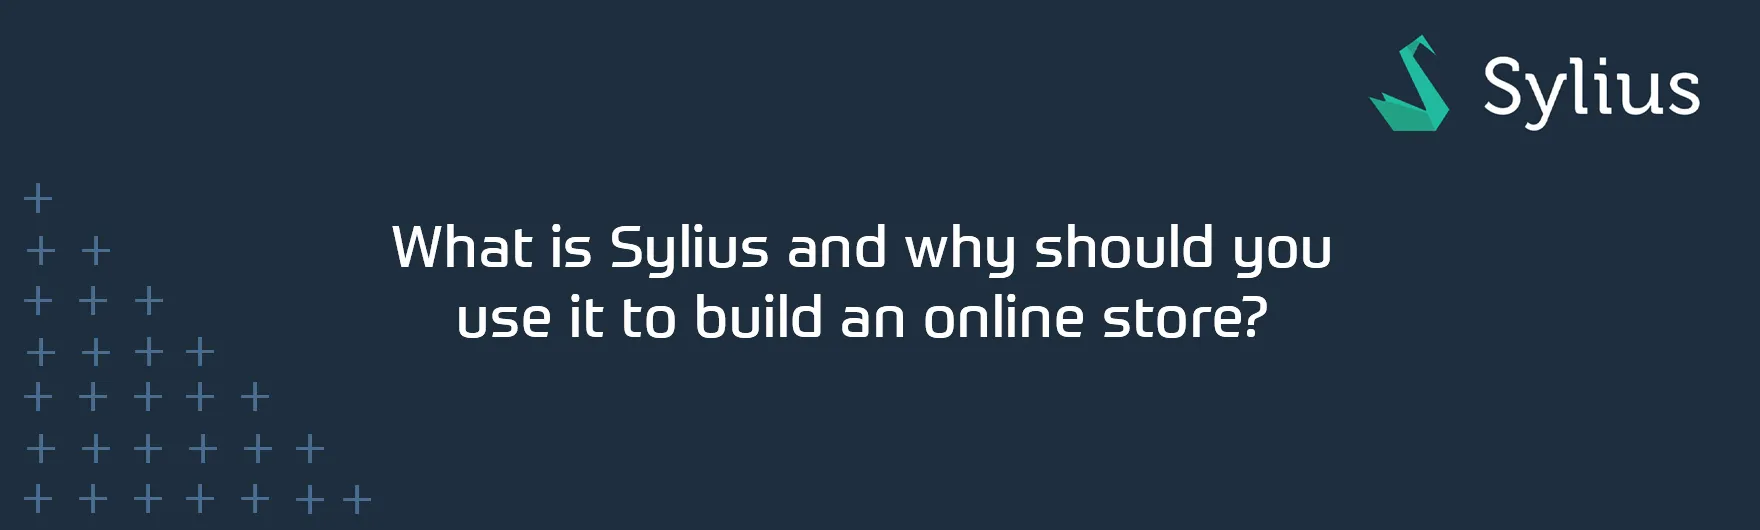 What Sylius is and what it is for